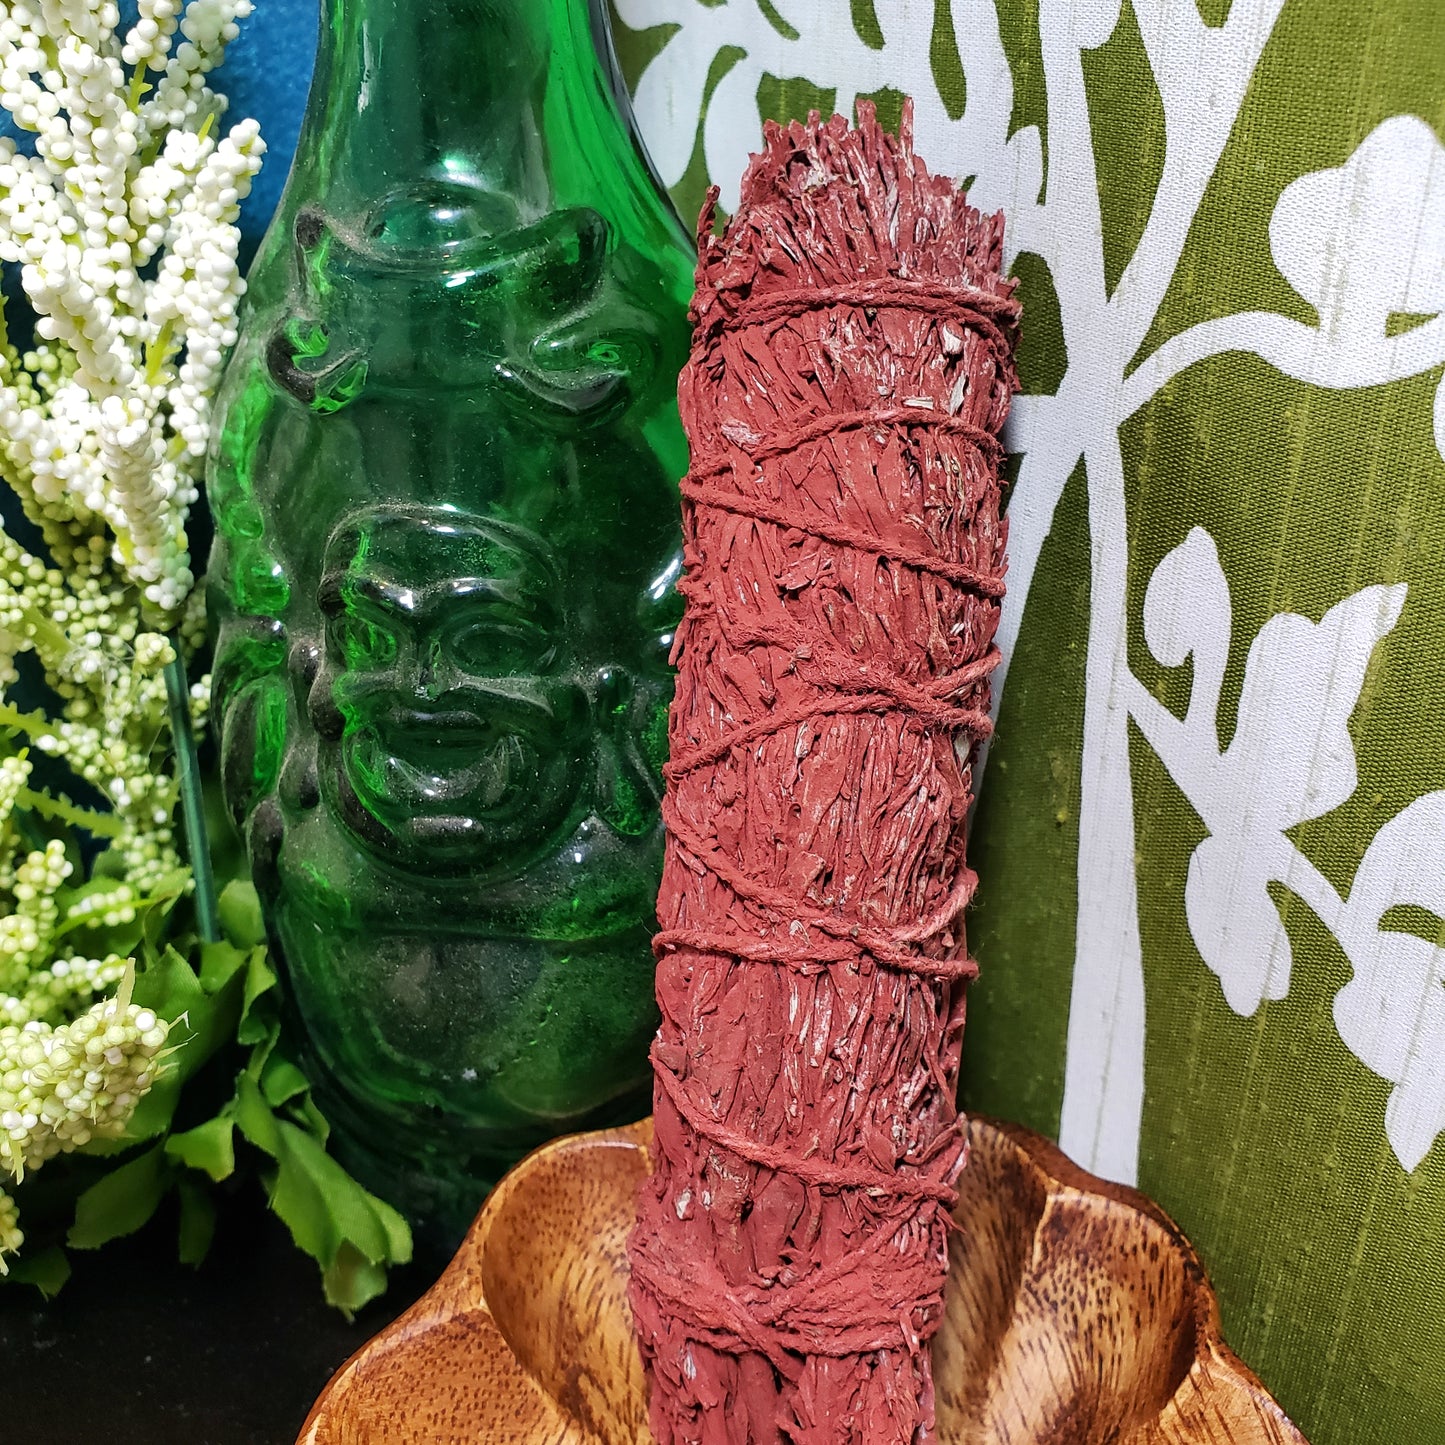 Smudge stick-White sage and Dragons blood resin